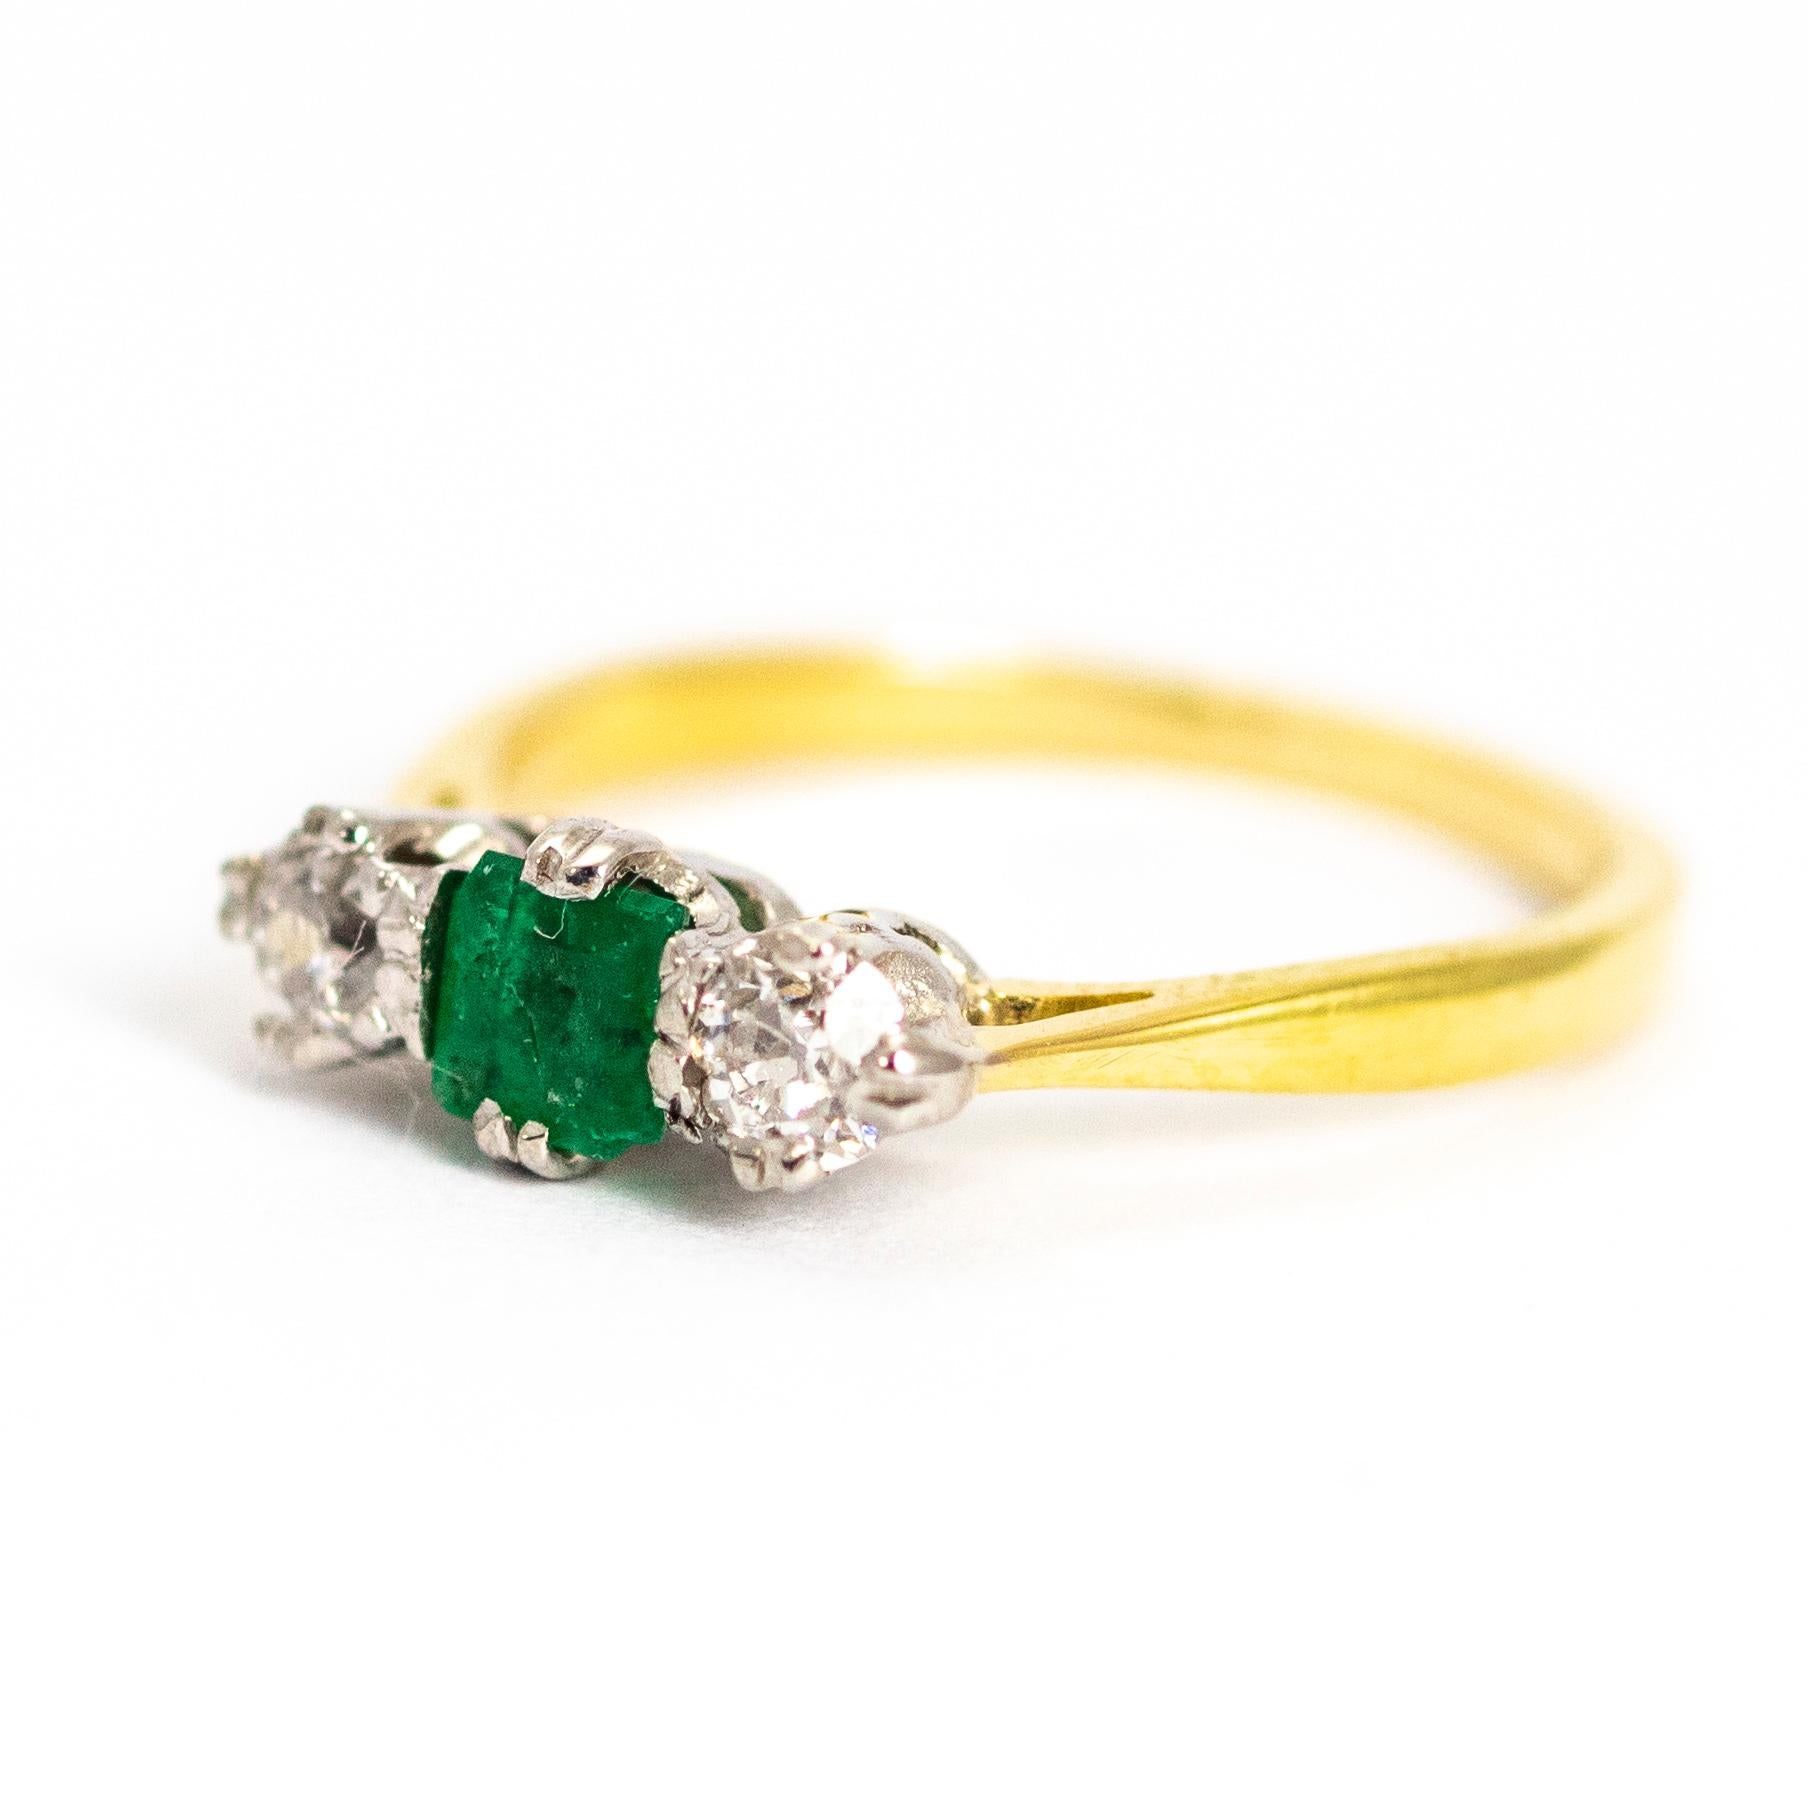 A beautiful vintage three-stone ring, centrally set with a superb square-cut green emerald flanked by two lovely white diamonds measuring approximately 18 points each.  The stones fixed in white gold settings to complement their wonderful colour.